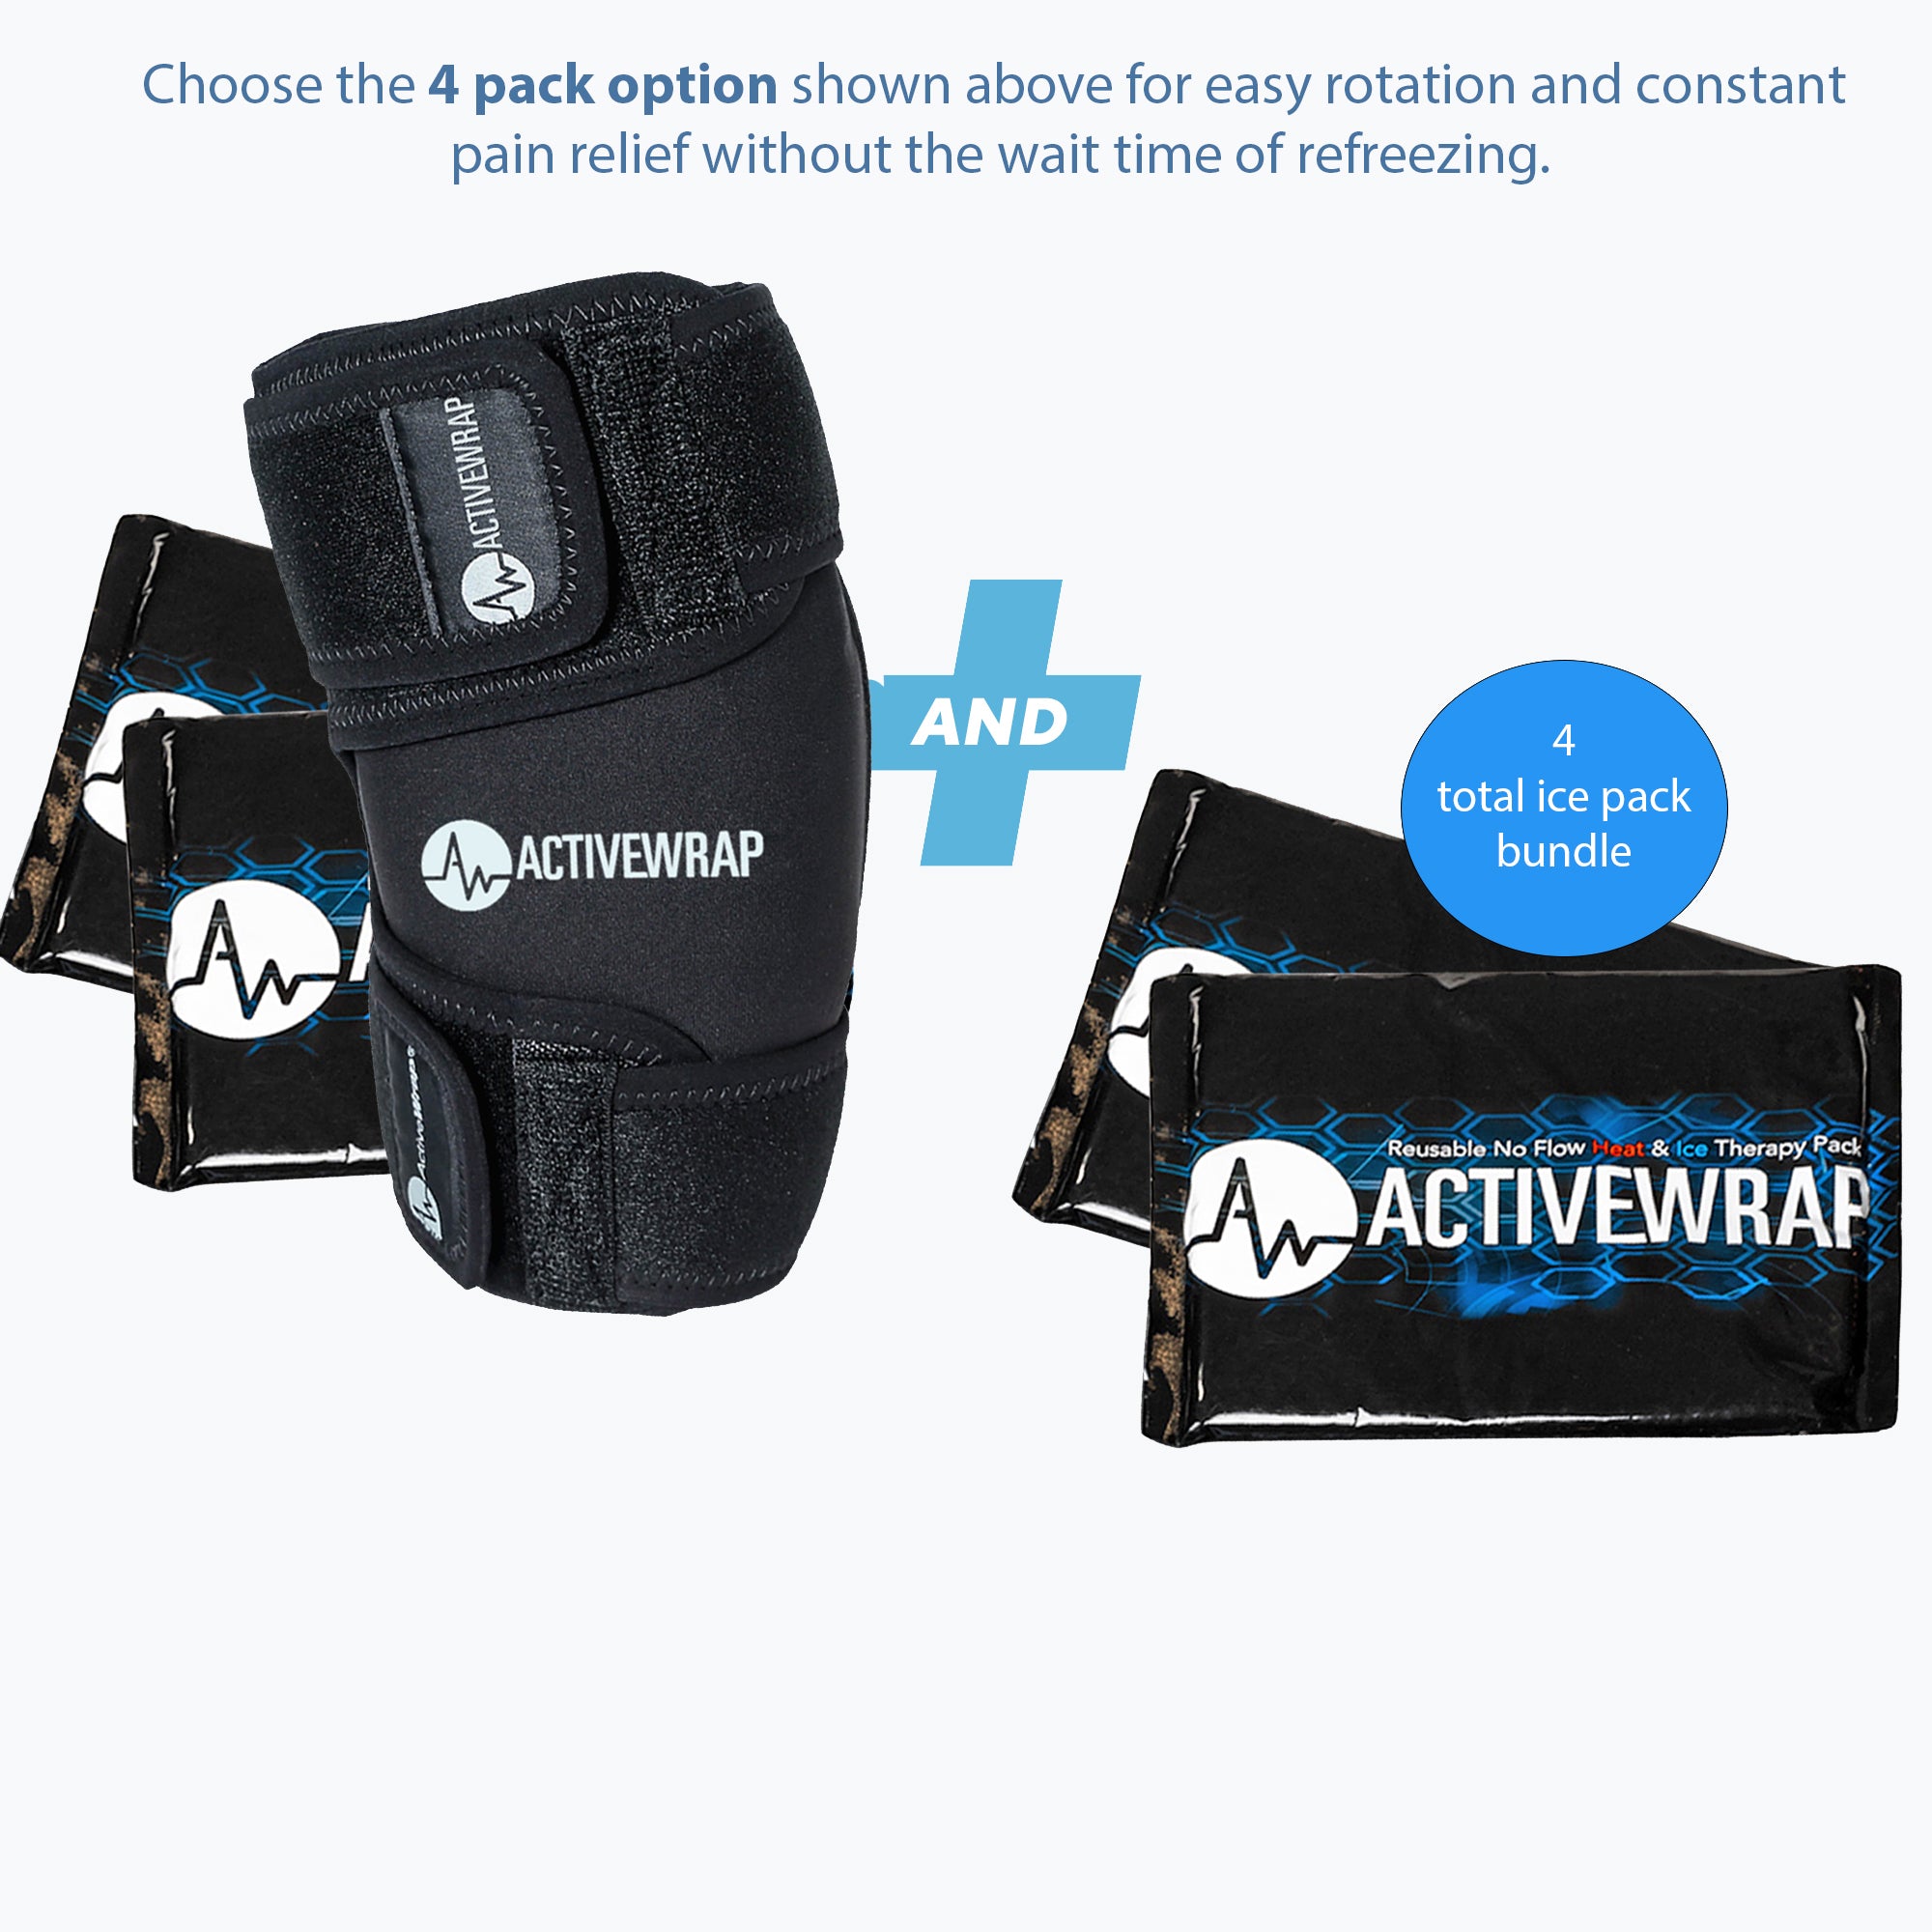 Heat & Ice Knee Wrap & Pack (All-in-1)